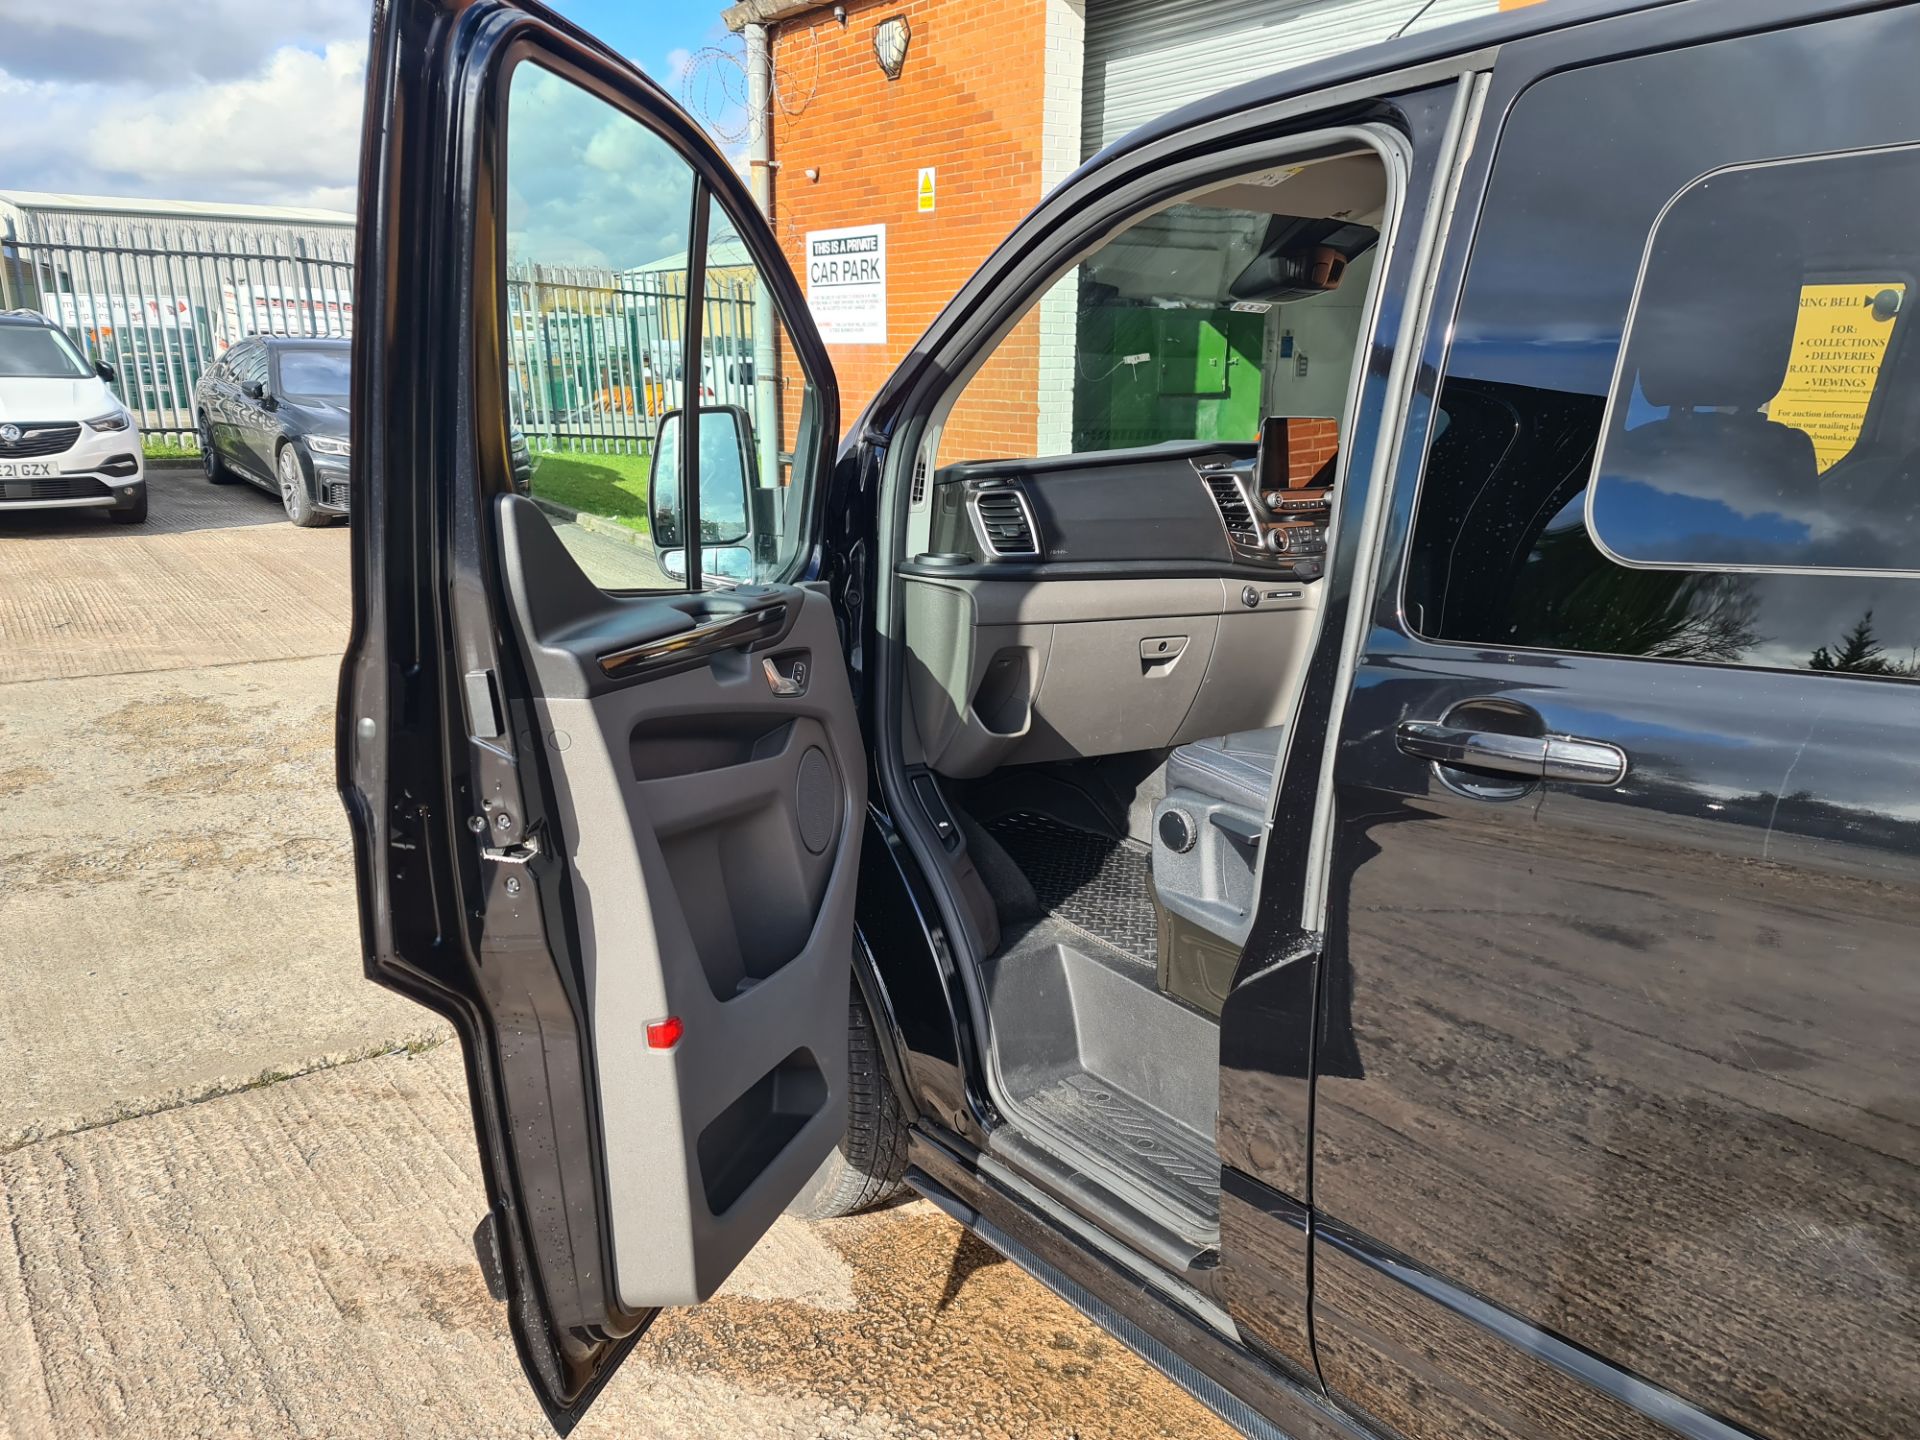 2021 Ford Transit 320LMTD Motion R panel van, auto gearbox, Ultra High Spec - Image 53 of 102